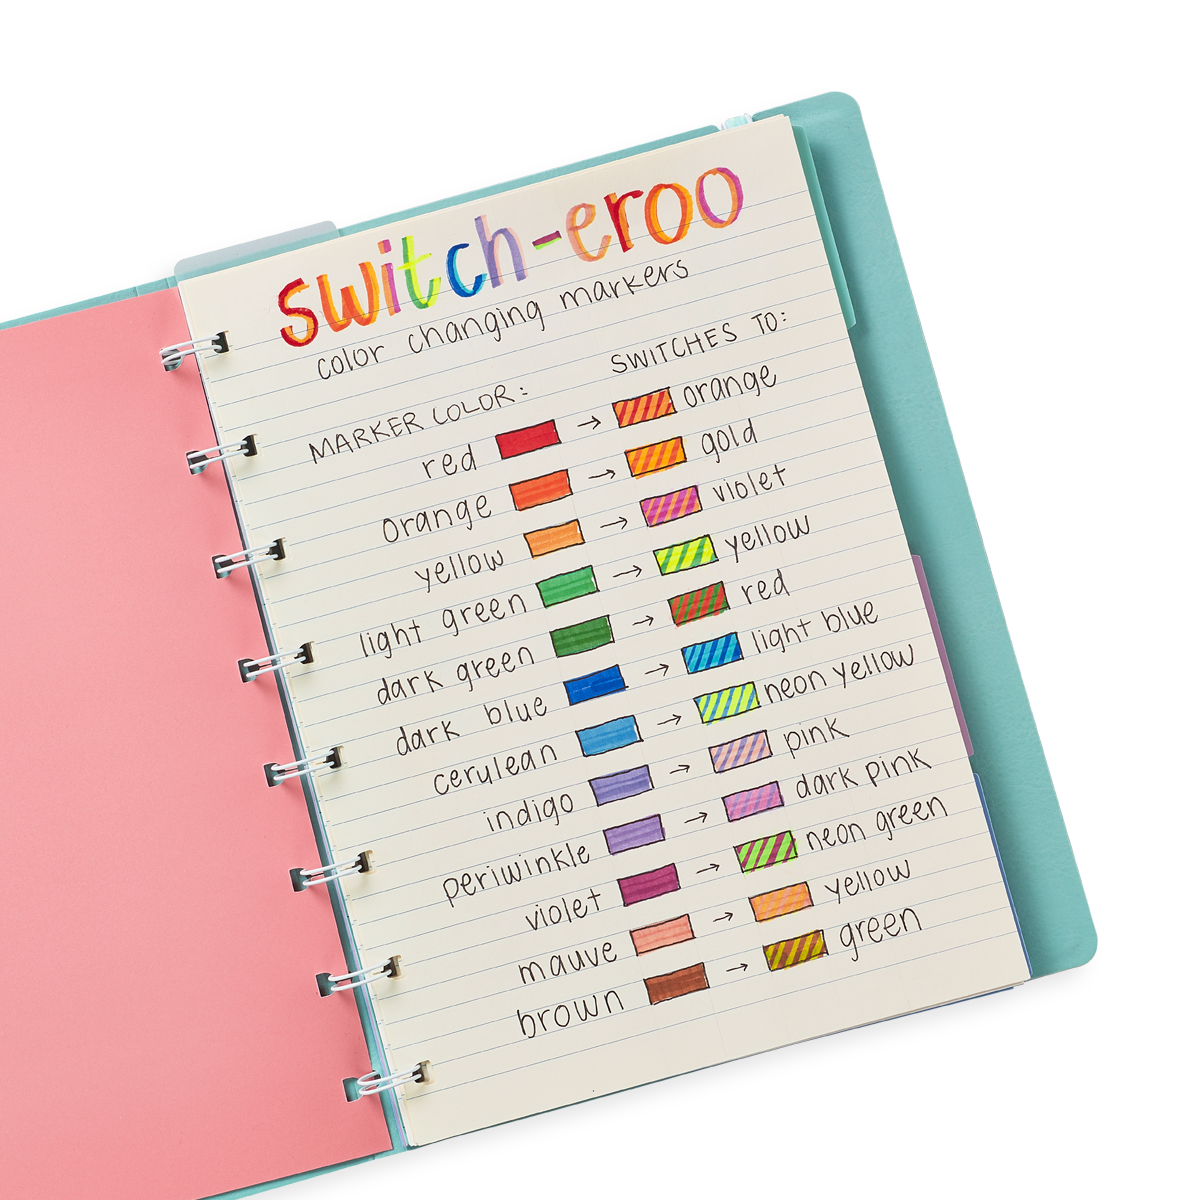 Switch-Eroo Color Changing Markers - OOLY